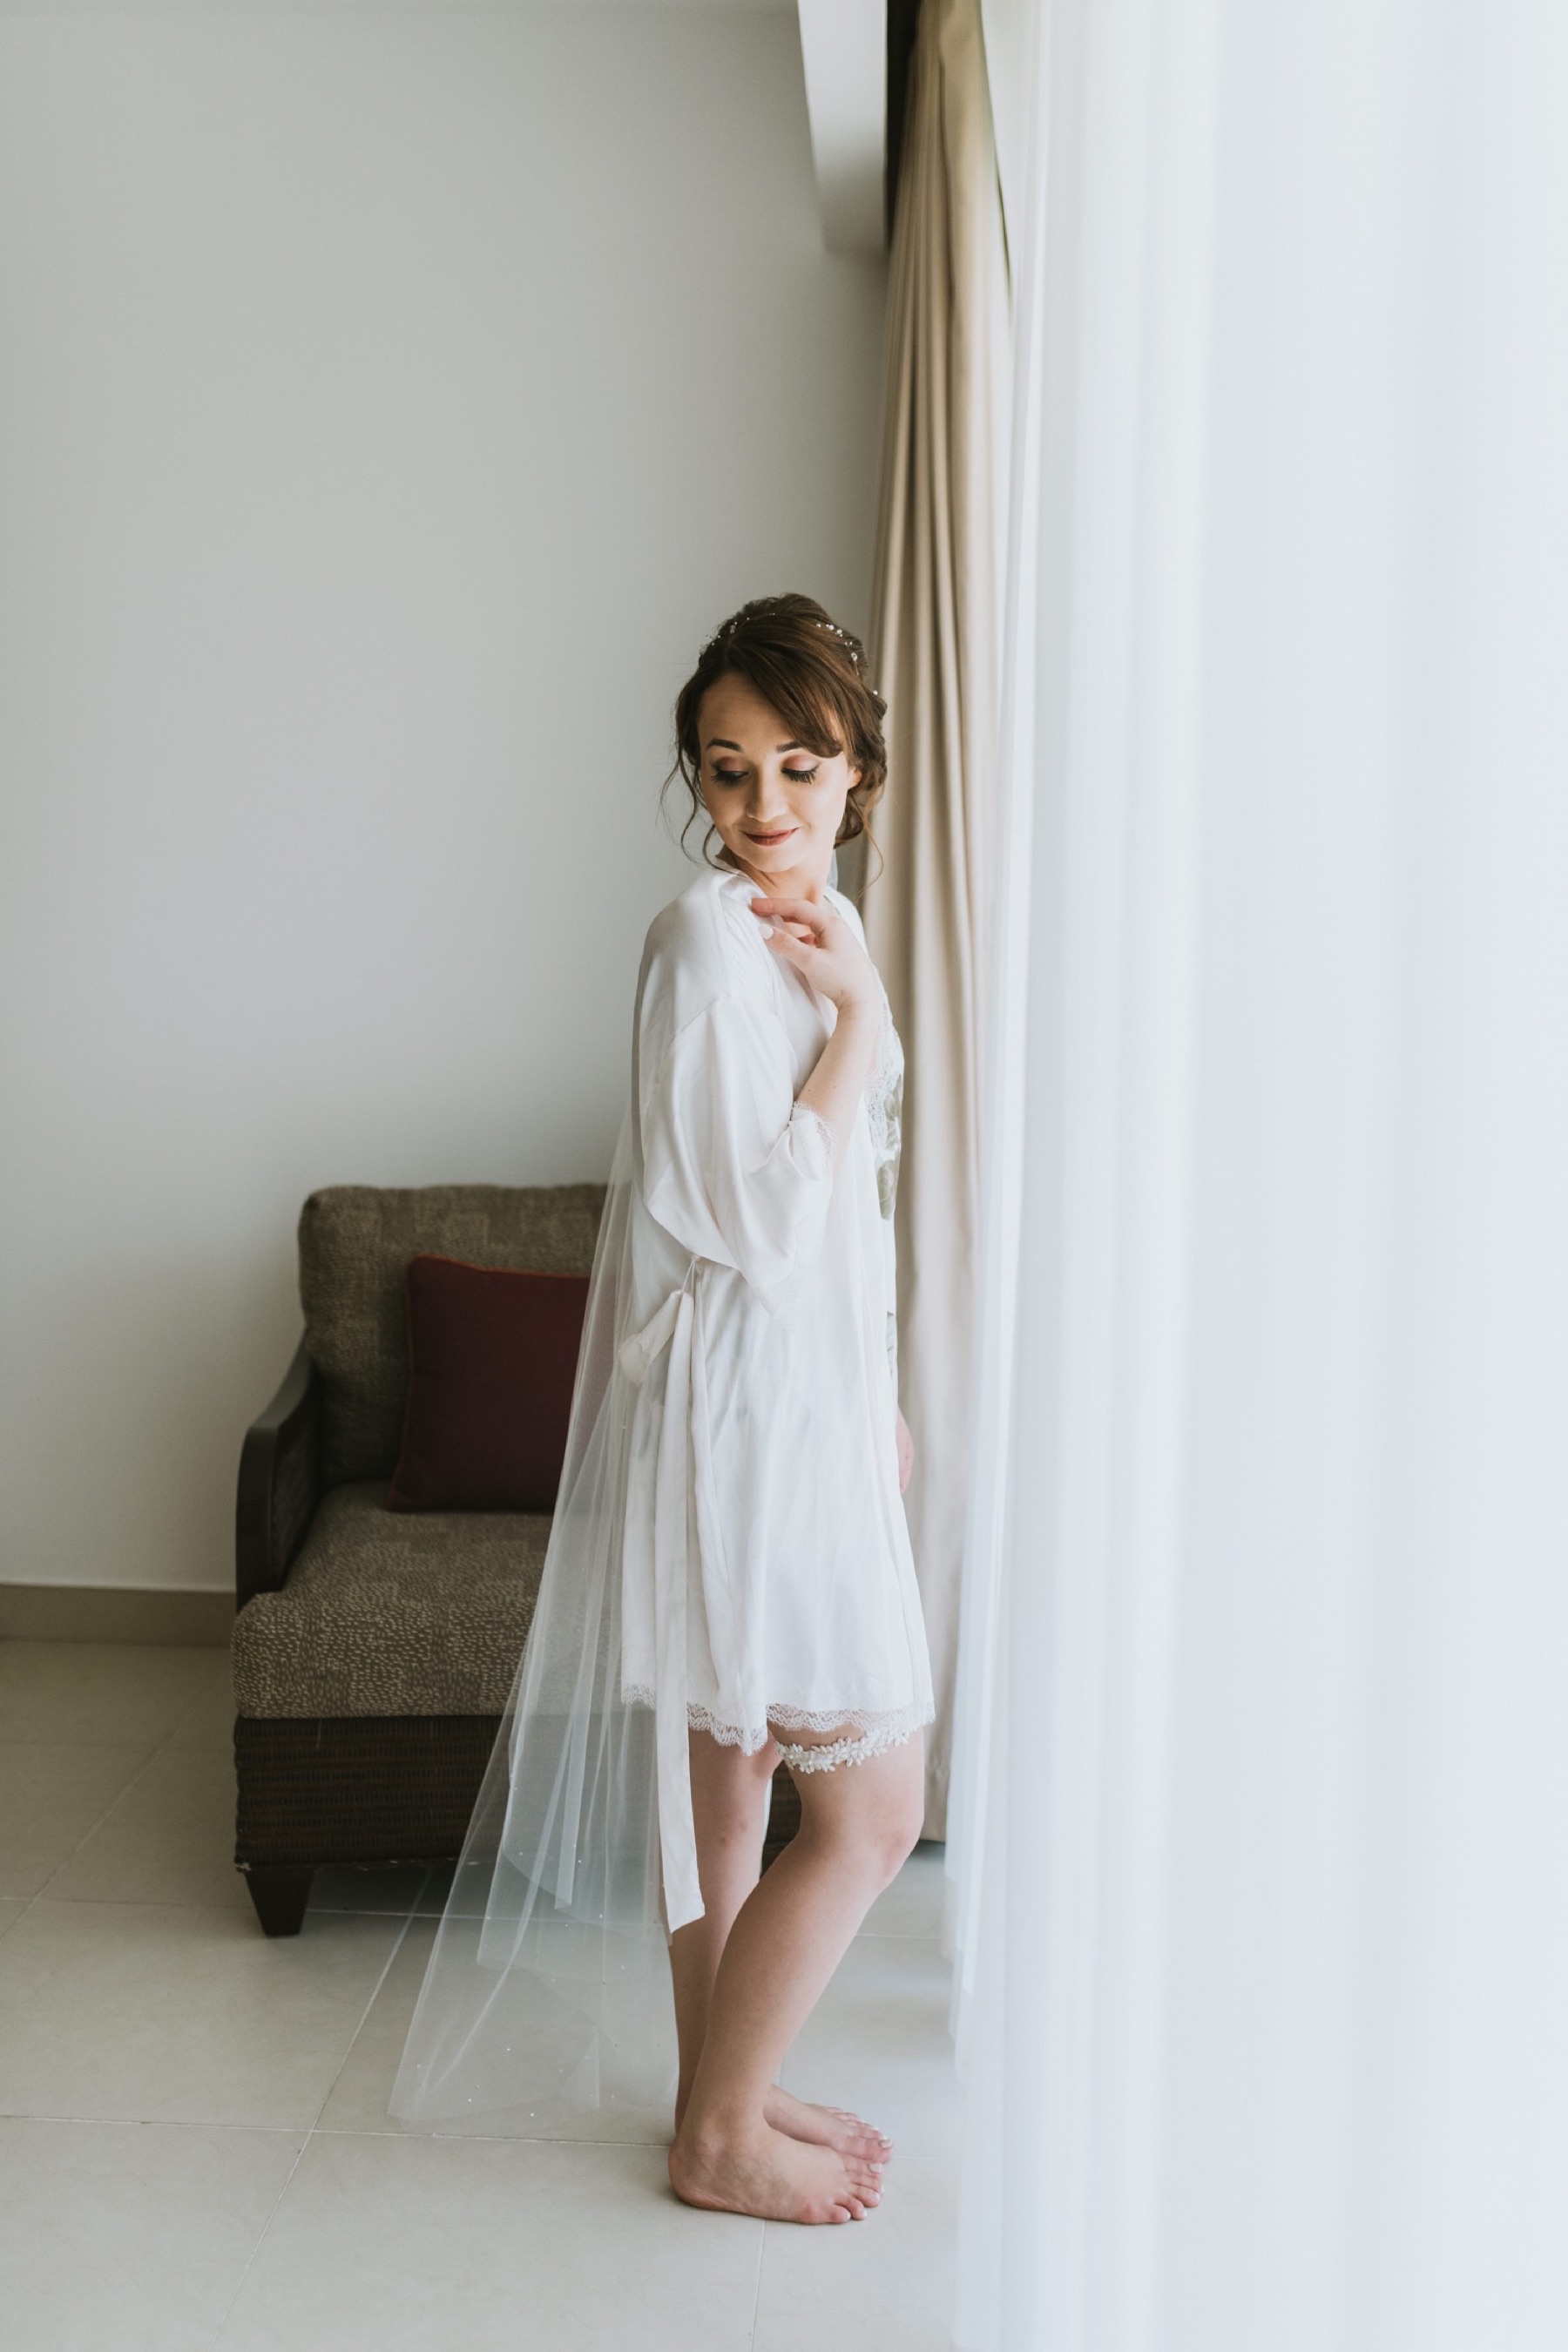 Bride standing in front of a window looking down at her shoulder with her bride robe and veil on